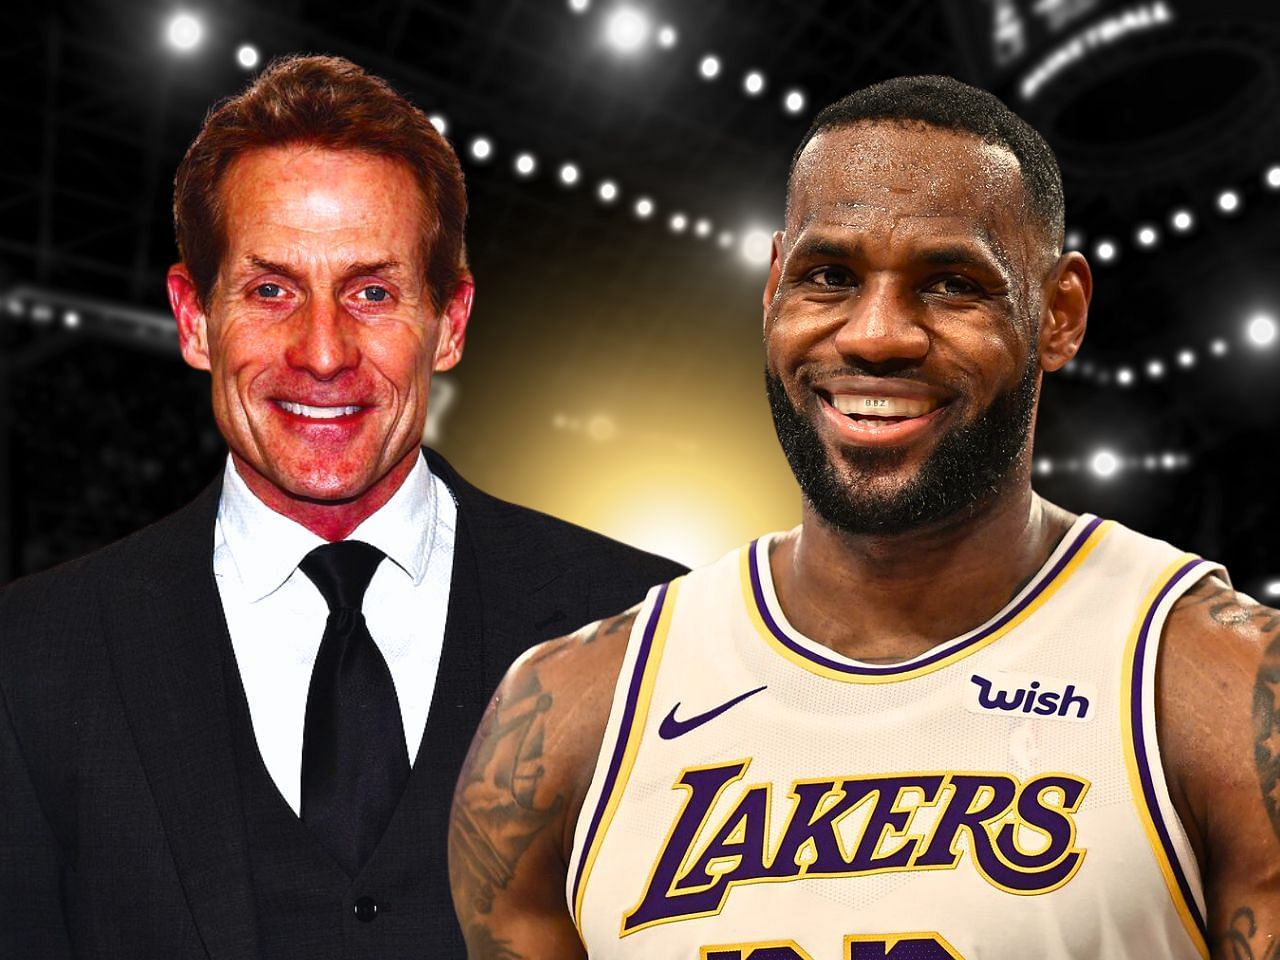 Skip Bayless is bringing out LeBron James&rsquo; ghosts in 2023 WCF